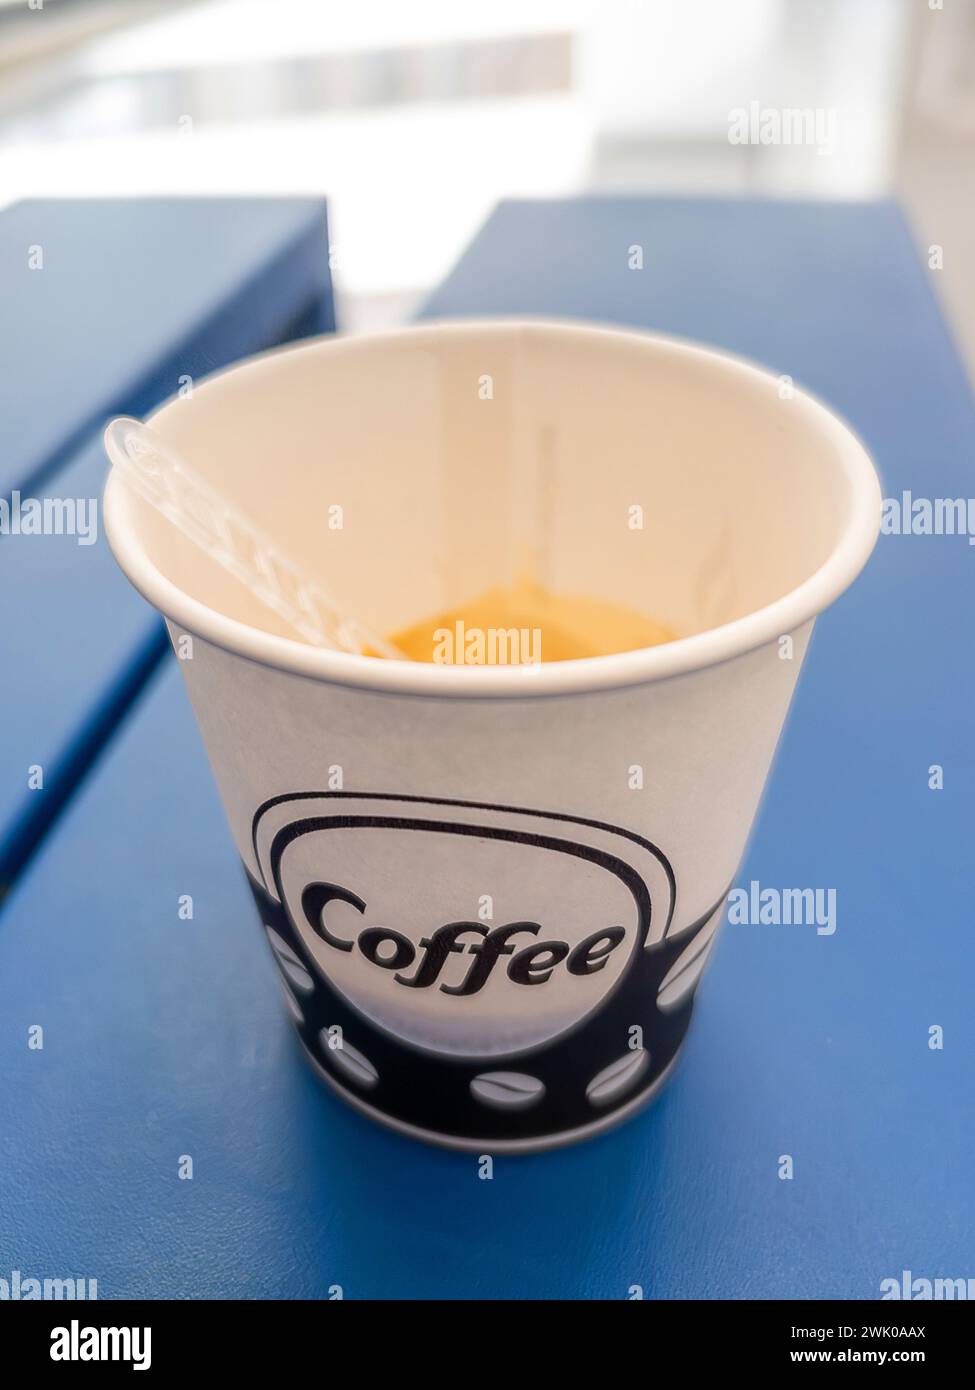 Coffee in vending machine paper cup on blue plane on blurred background Stock Photo